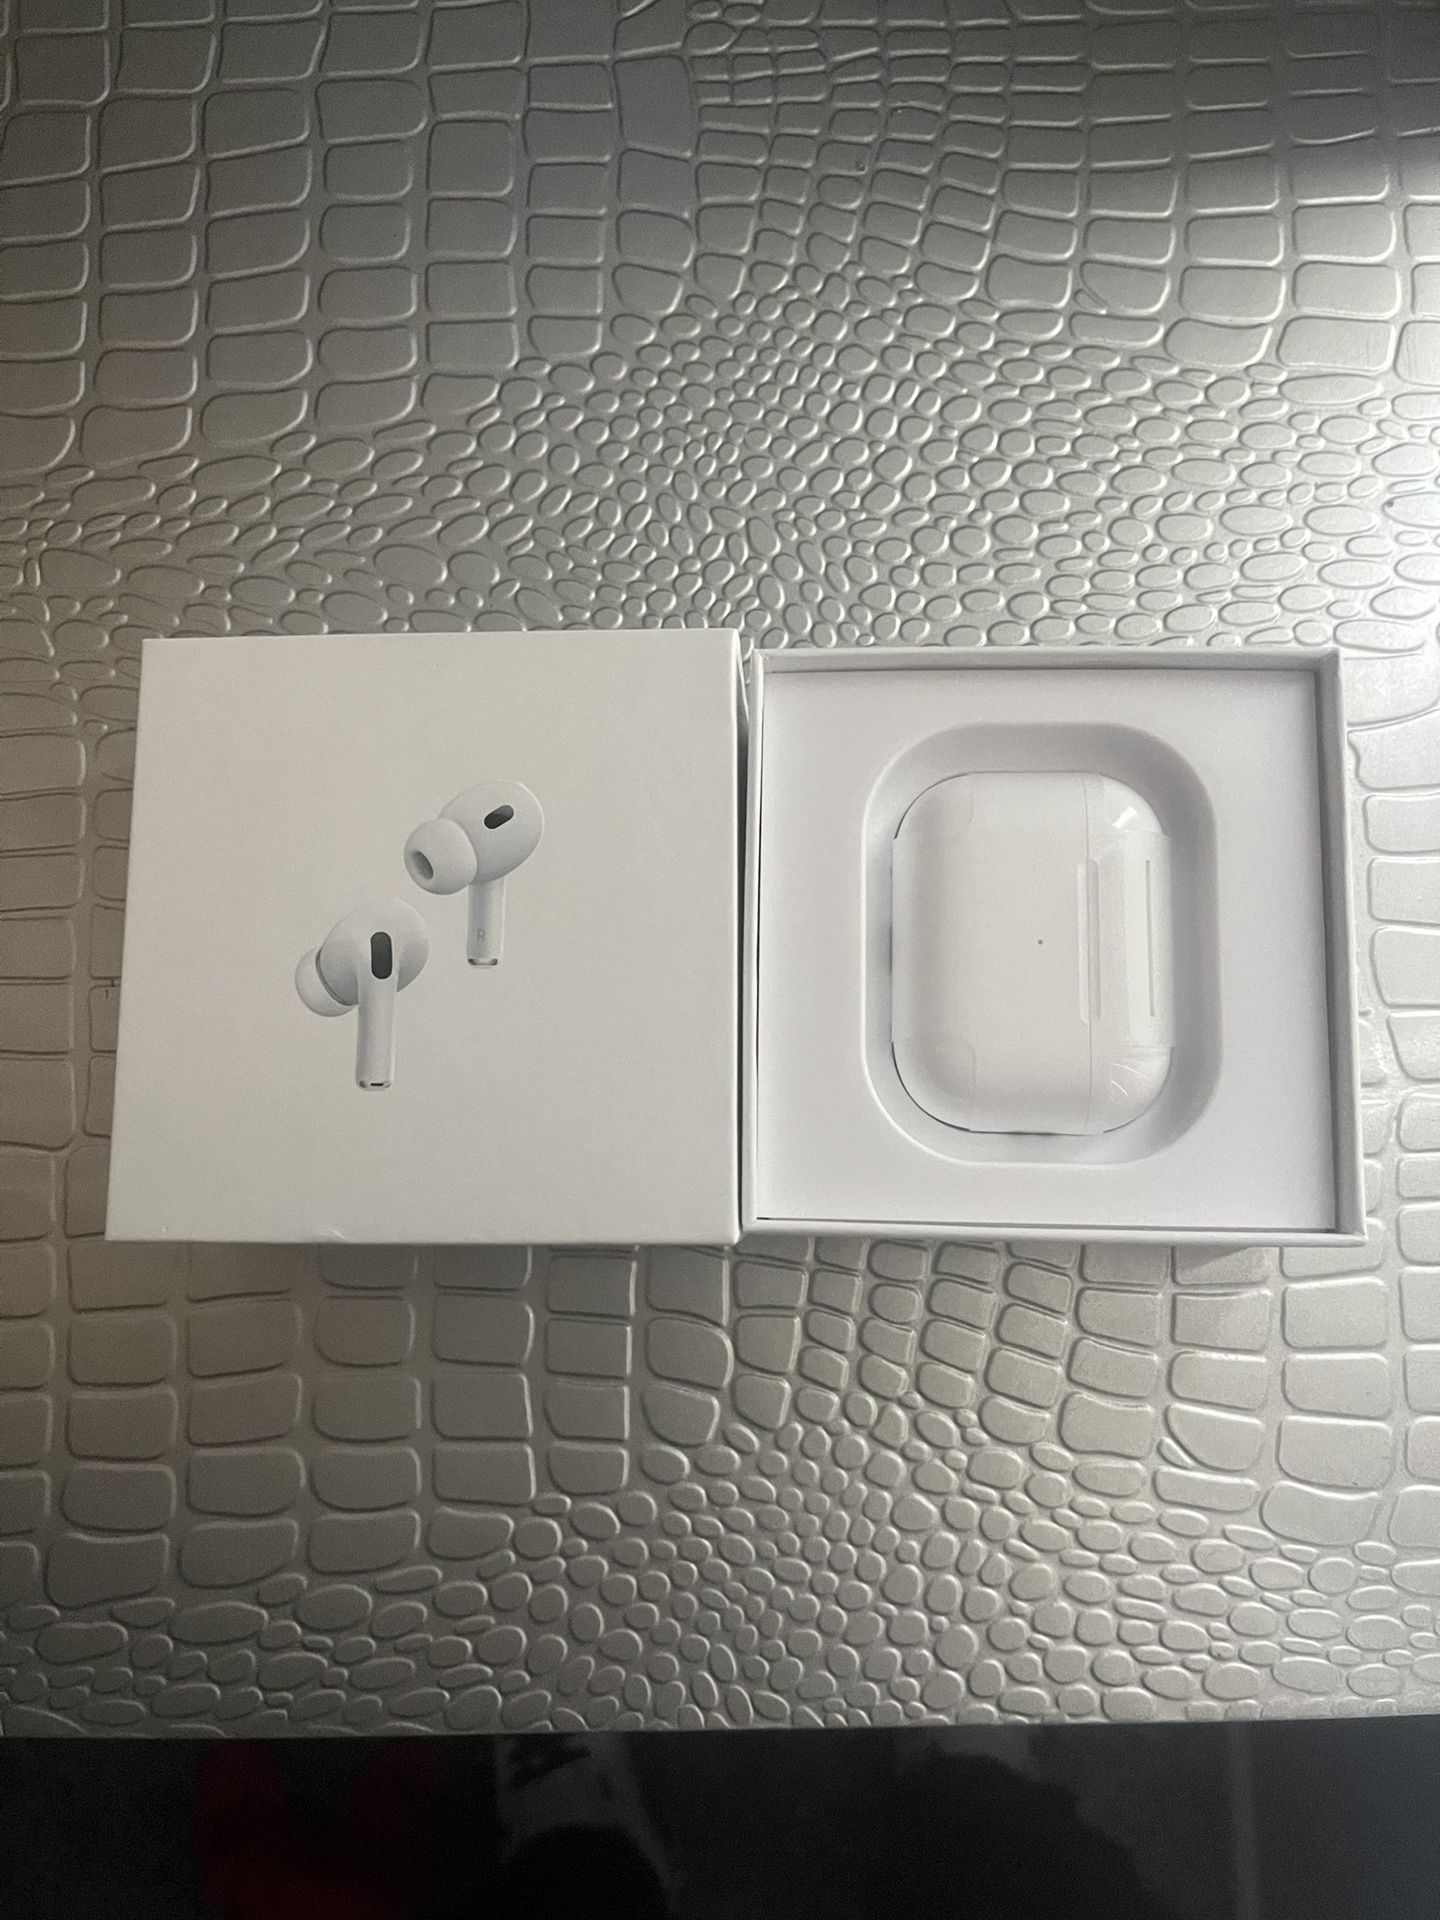 Airpods pro 2nd generation $140 take advantage of it, make your mom laugh today, which is a very important day for her and at a very good price, total